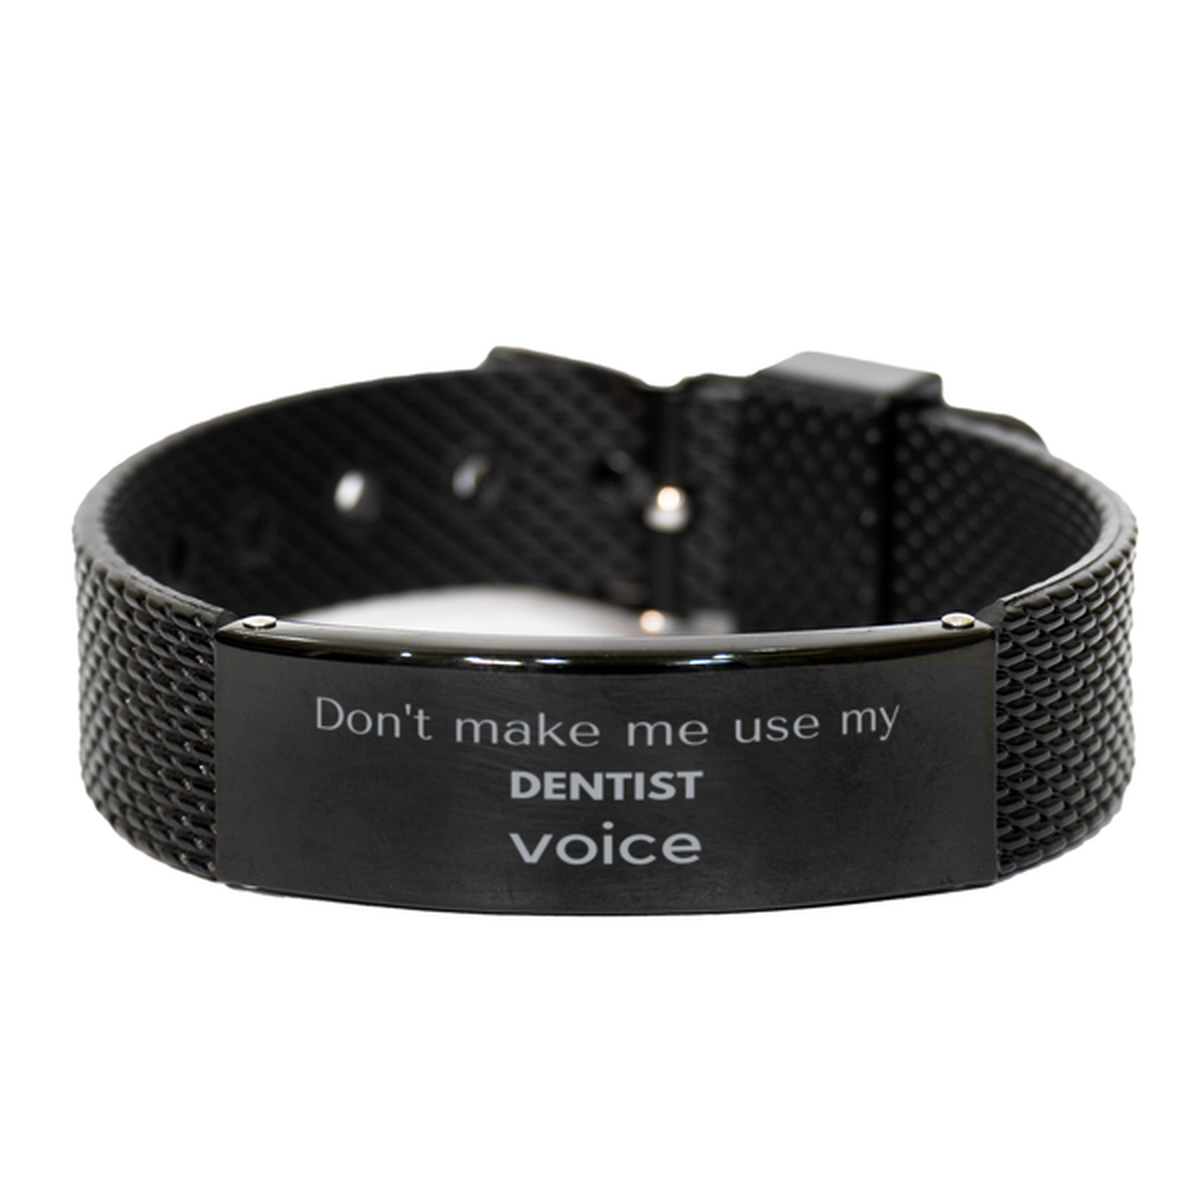 Don't make me use my Dentist voice, Sarcasm Dentist Gifts, Christmas Dentist Black Shark Mesh Bracelet Birthday Unique Gifts For Dentist Coworkers, Men, Women, Colleague, Friends